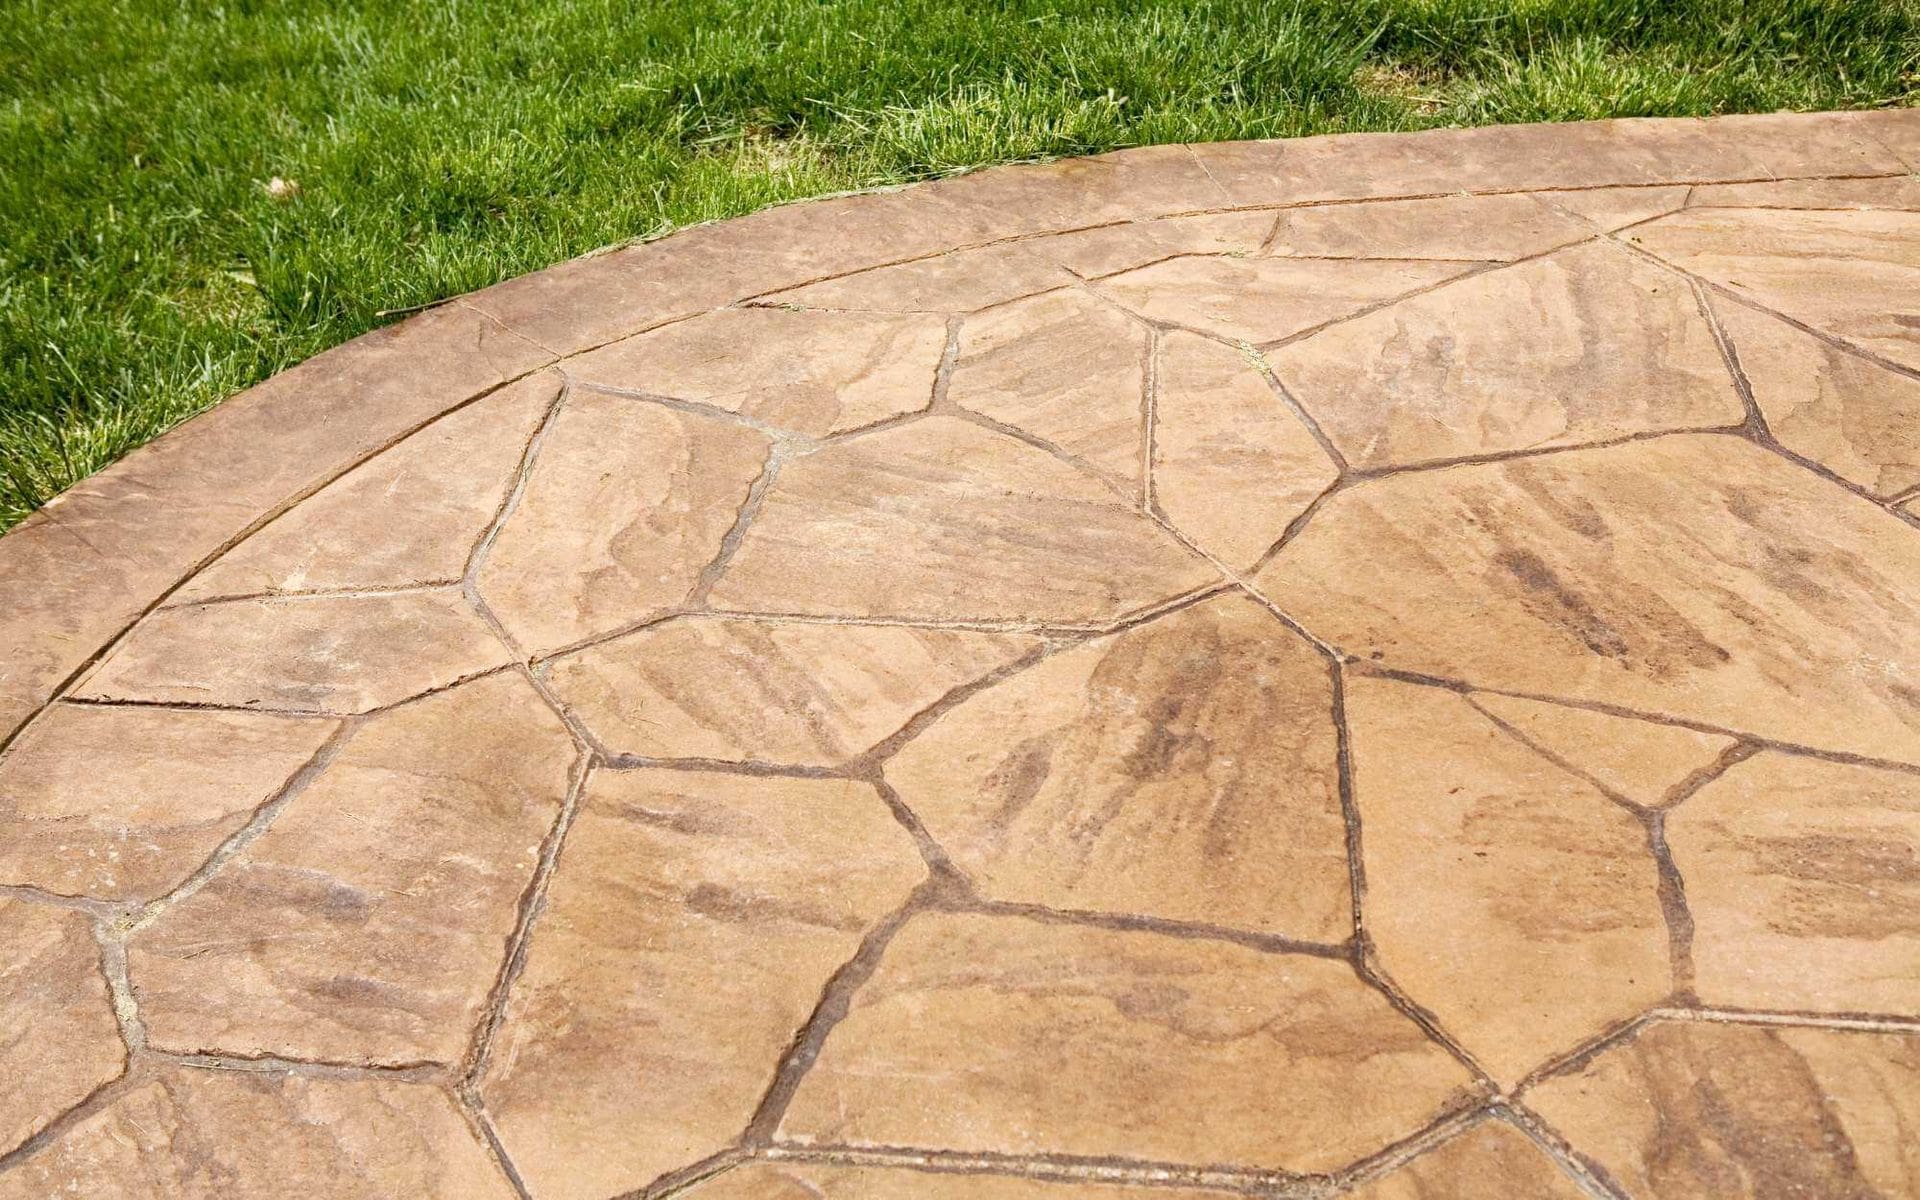 A section of a patio in Peoria, Arizona, made of irregularly shaped, tan-colored flagstone arranged in a circular pattern. The stone surface shows varied textures, with surrounding green grass visible at the top edge of the image. Contact us today for free quotes on all decorative concrete projects!